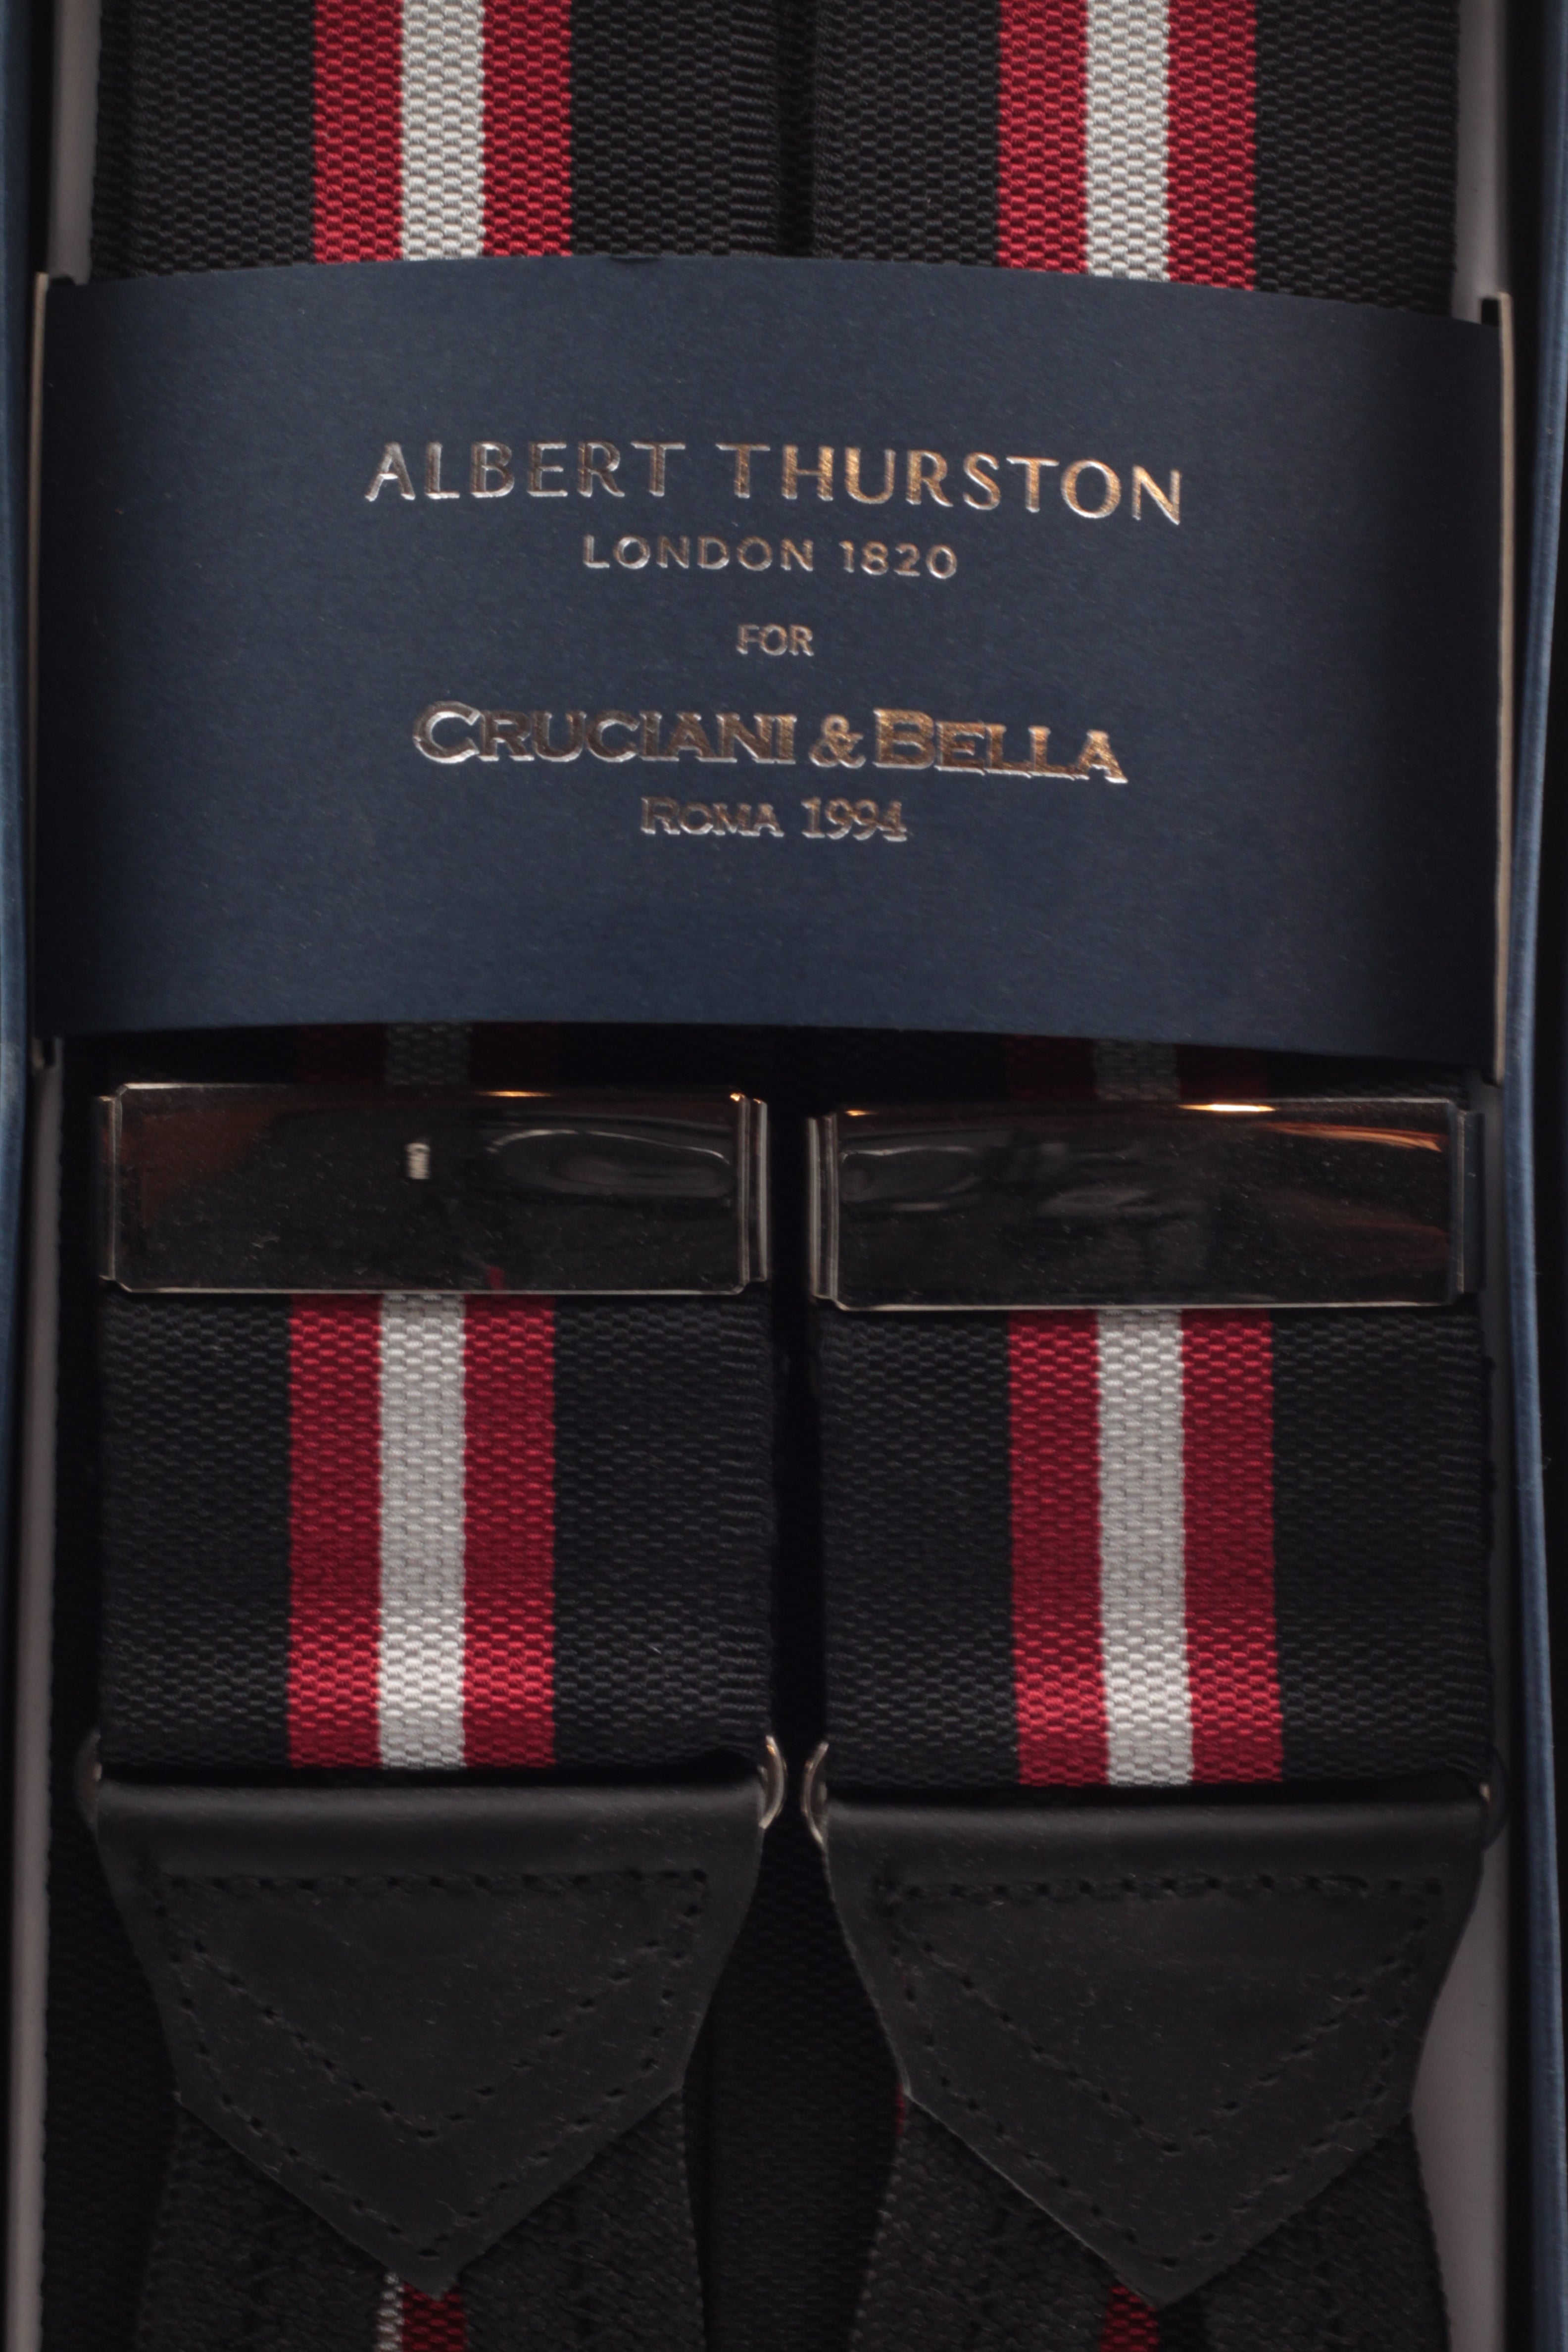 Albert Thurston for Cruciani & Bella Made in England Adjustable Sizing 40 mm Woven Barathea  Black, red and white stripes Braces Braid ends Y-Shaped Nickel Fittings Size: XL